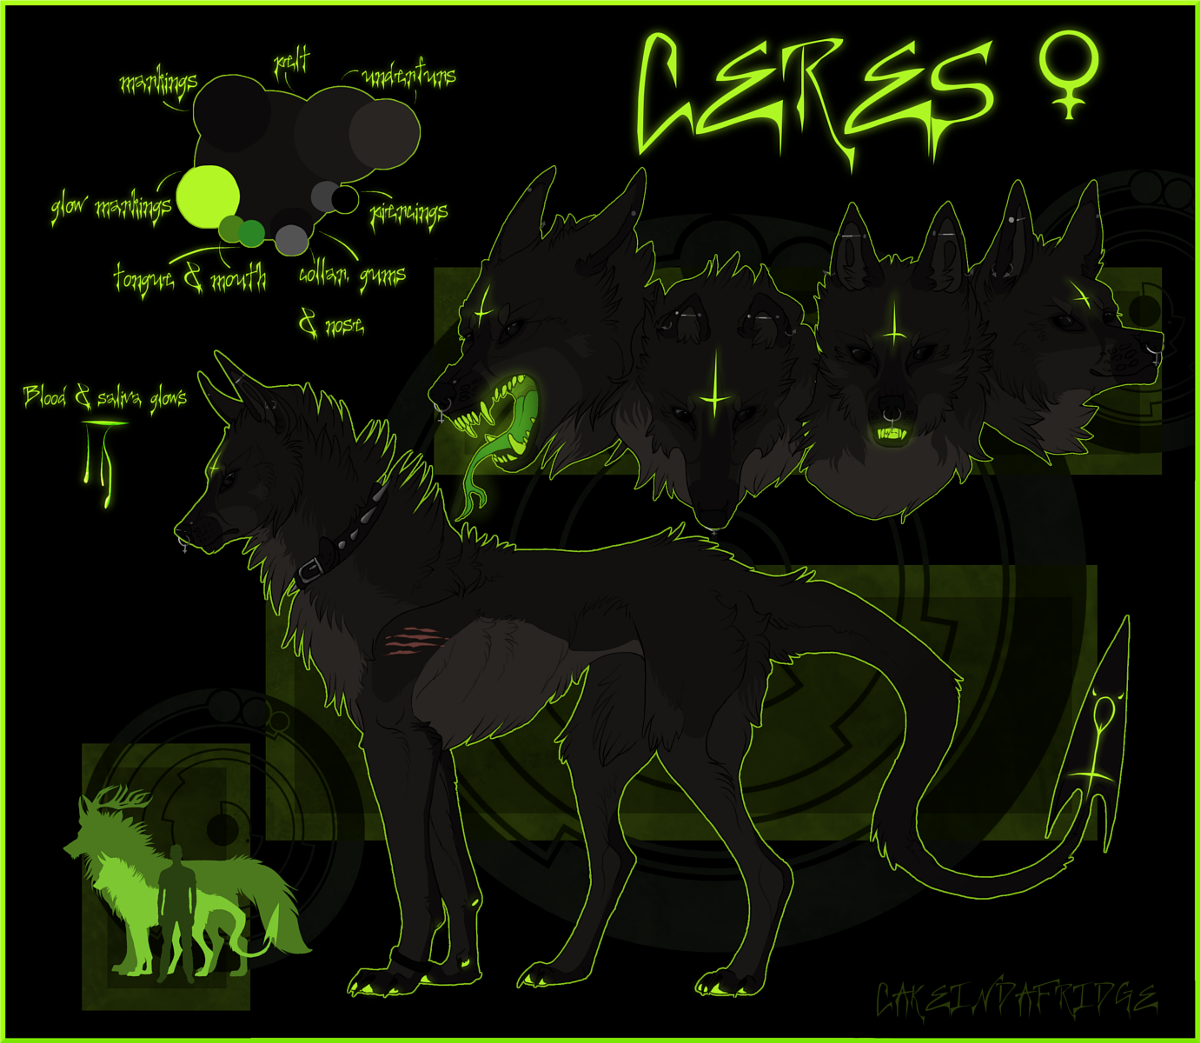 Up-to-date Ceres Ref